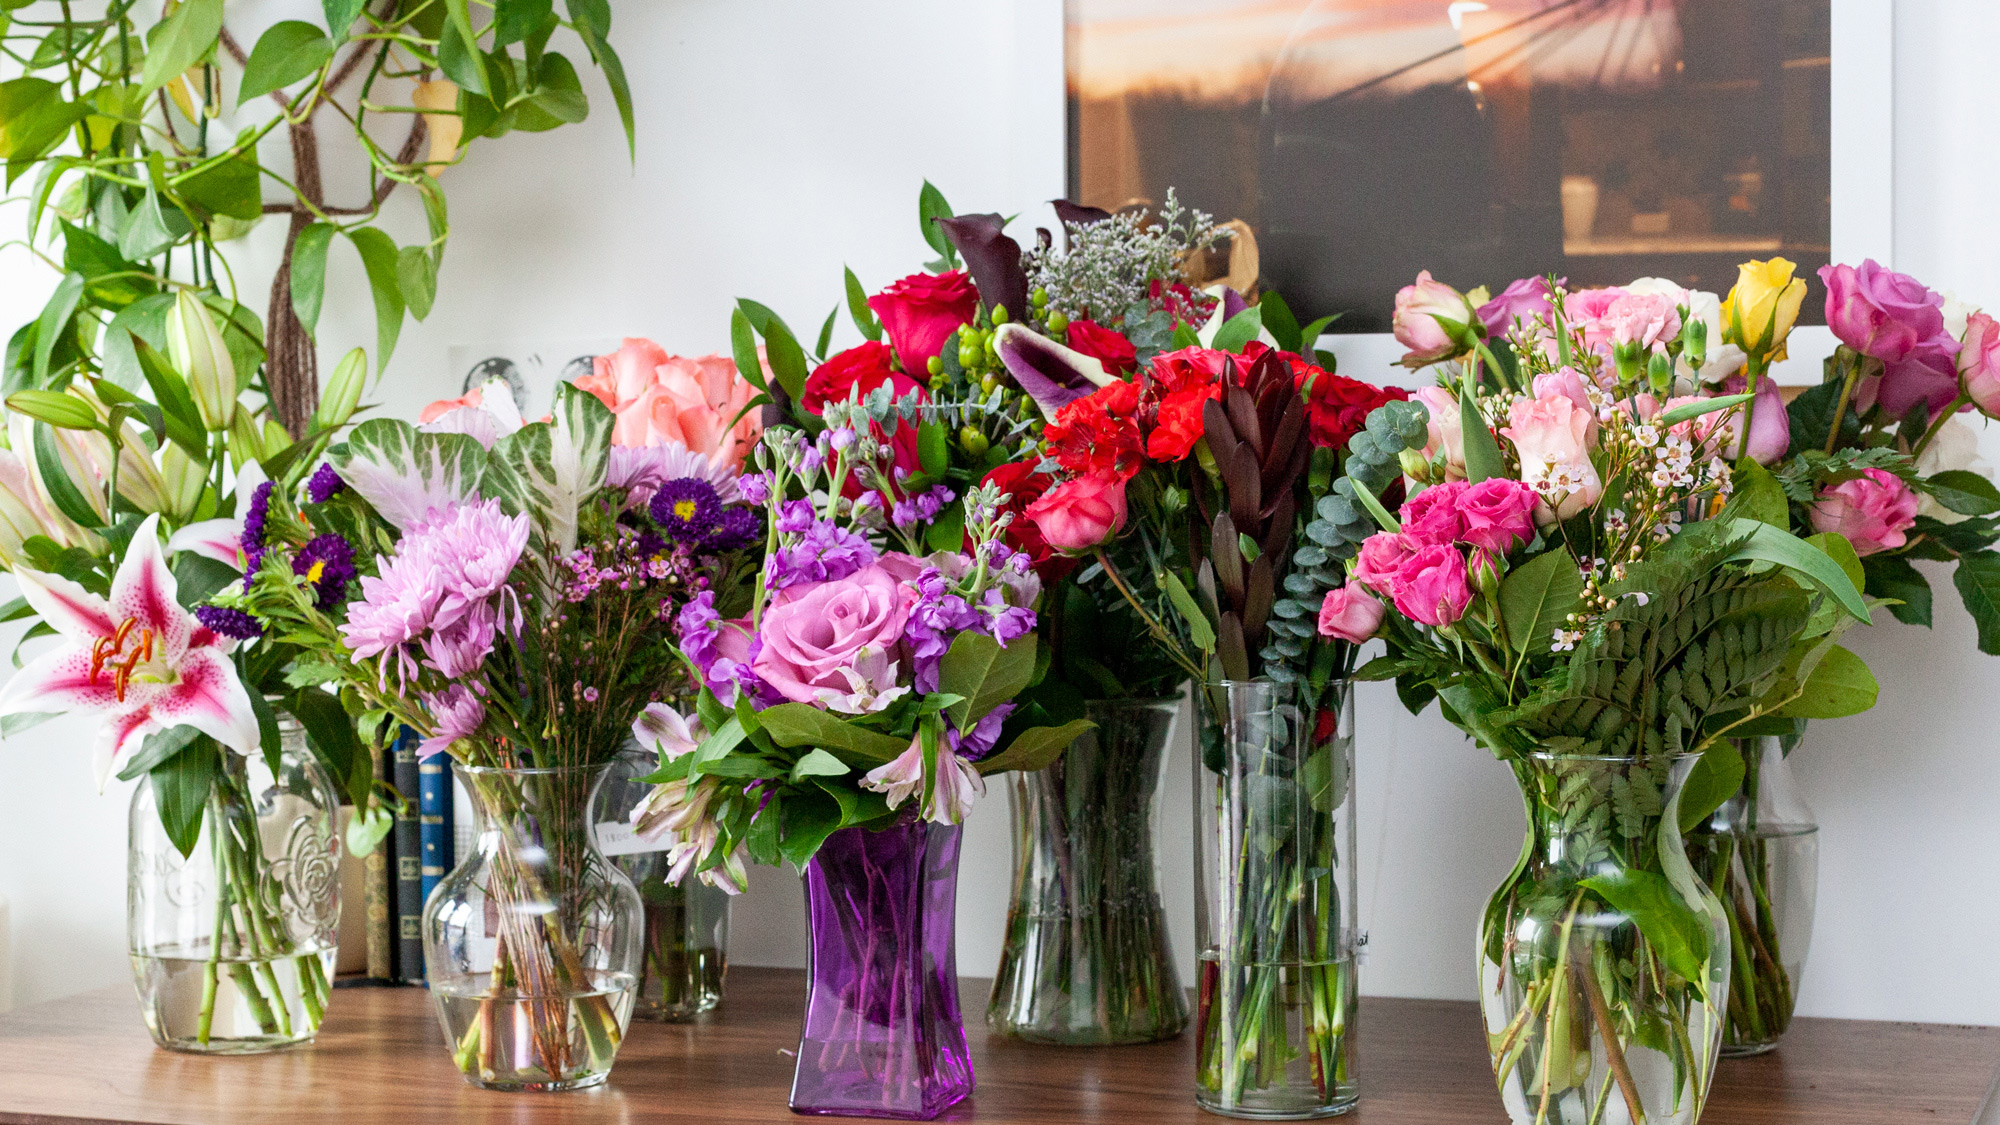 Benefits of online flower delivery services